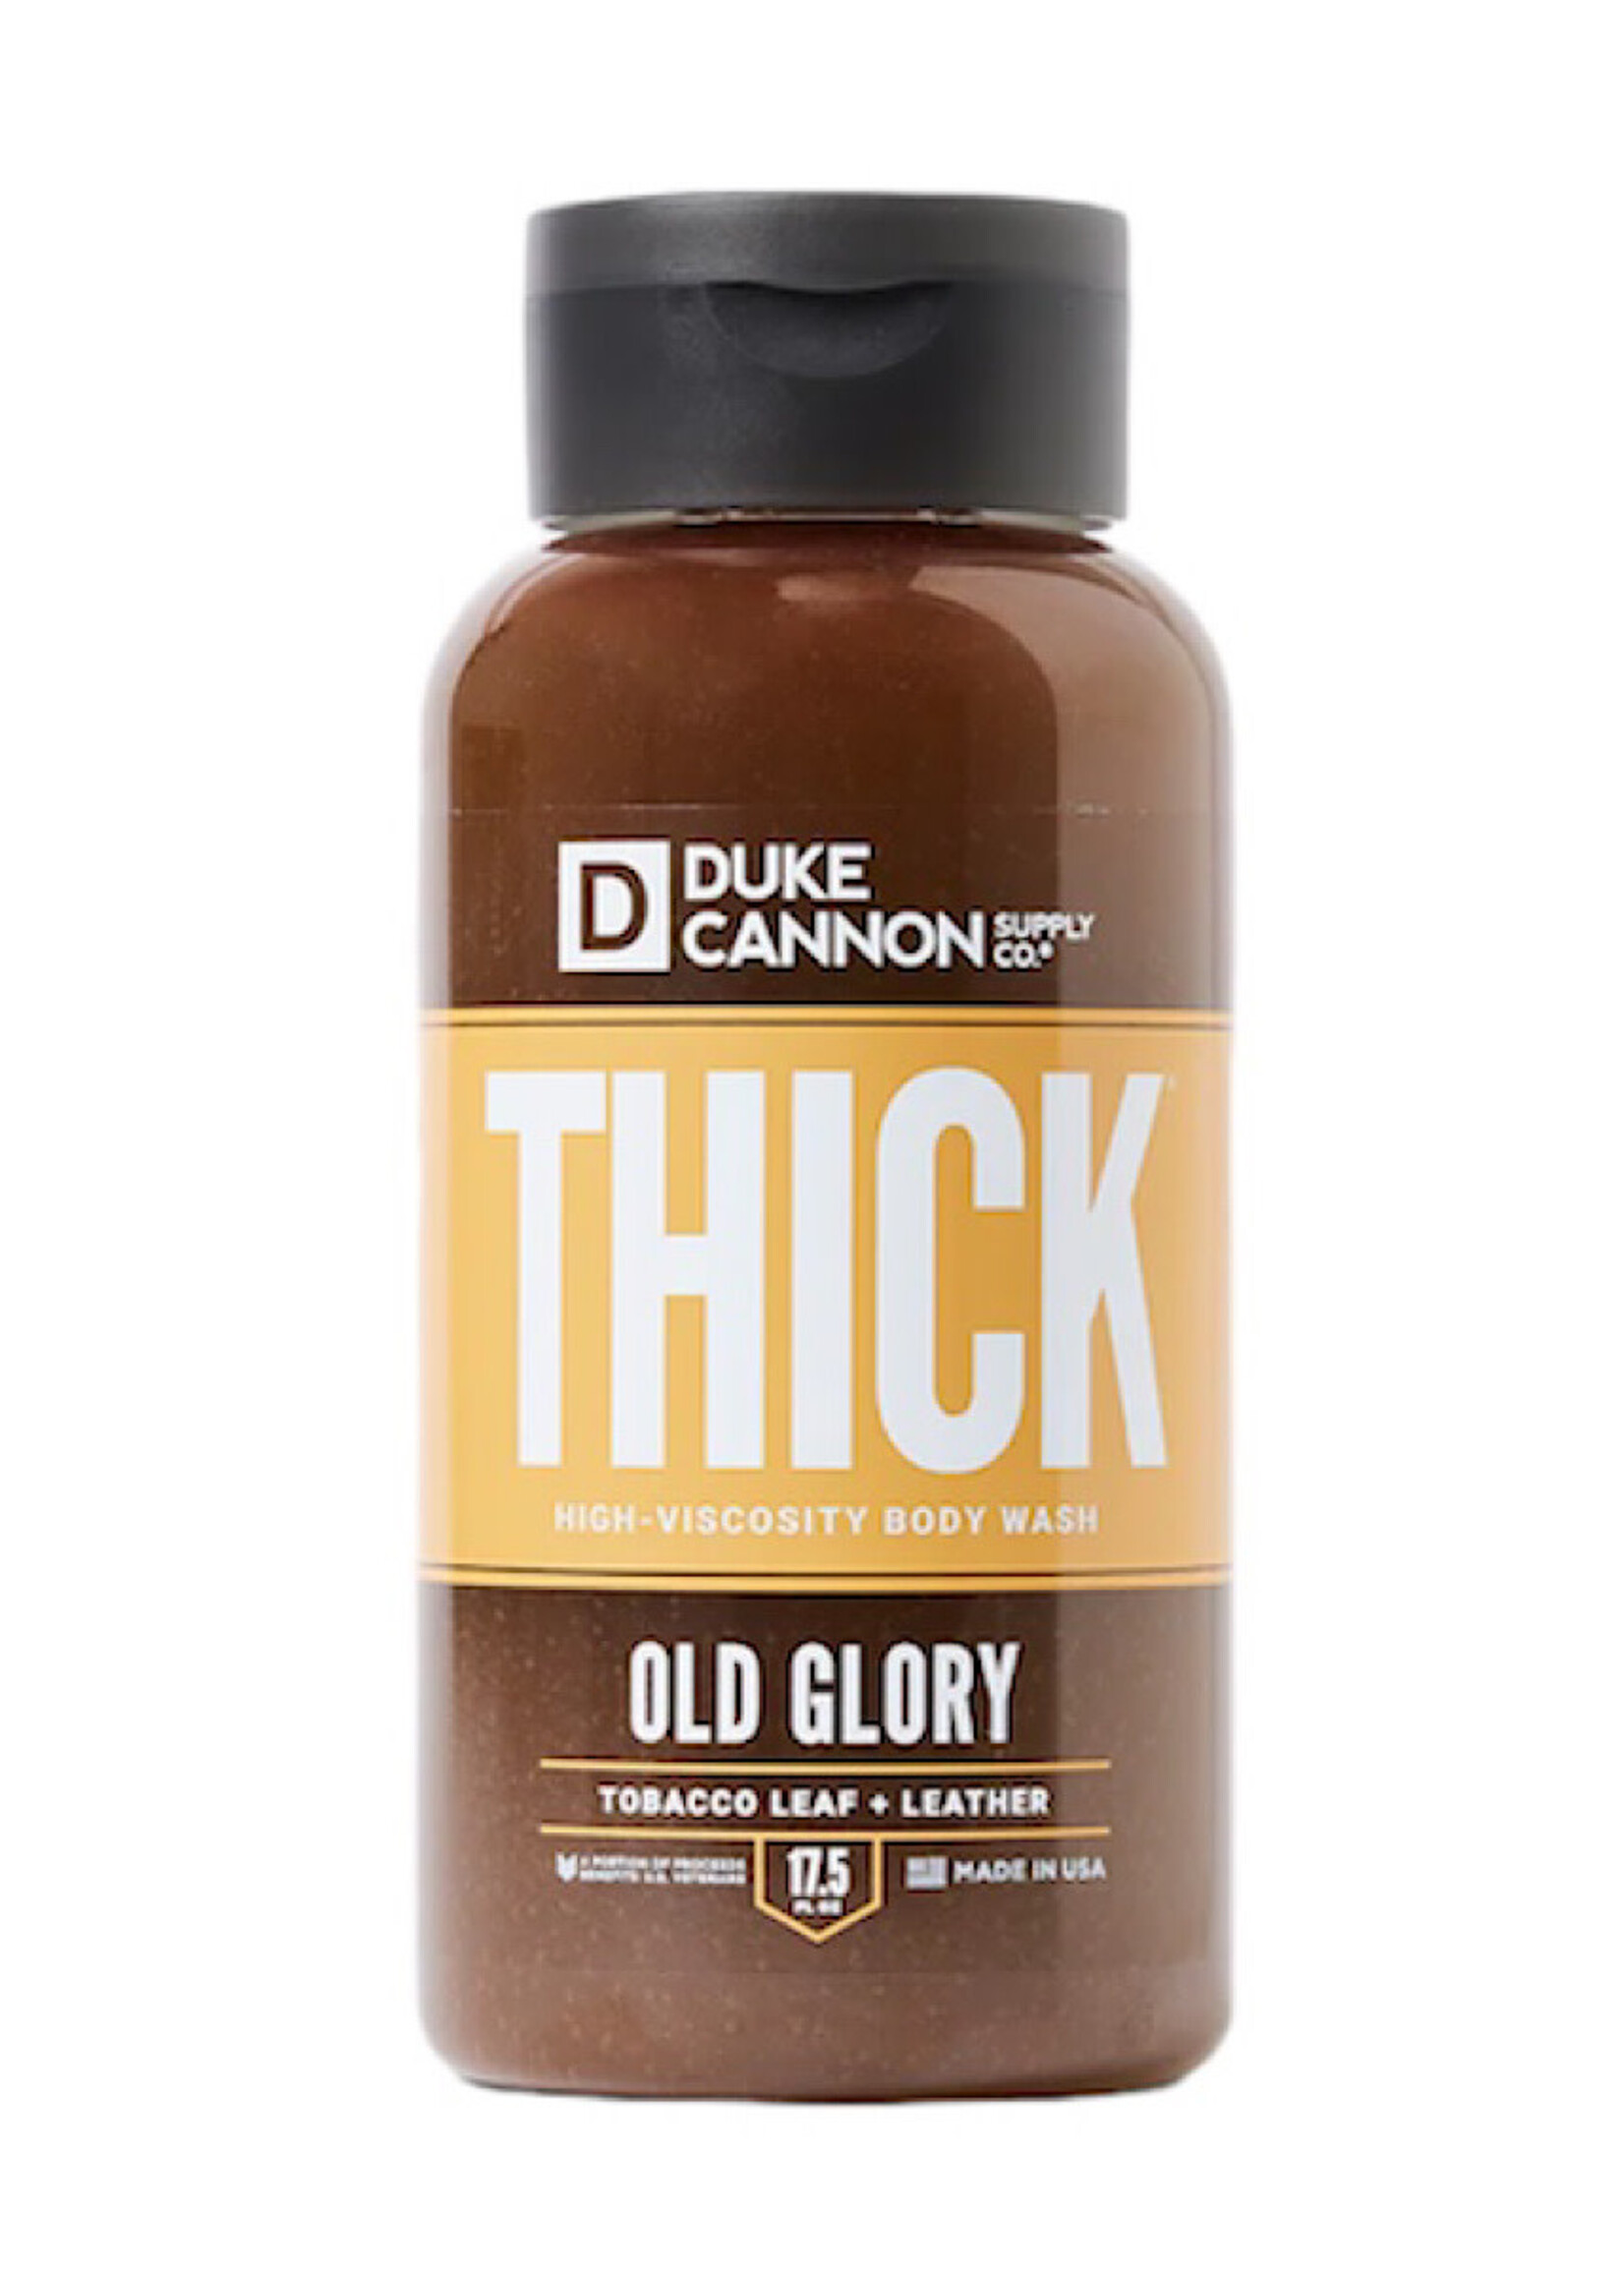 Duke Cannon DC Thick Body Wash - Old Glory